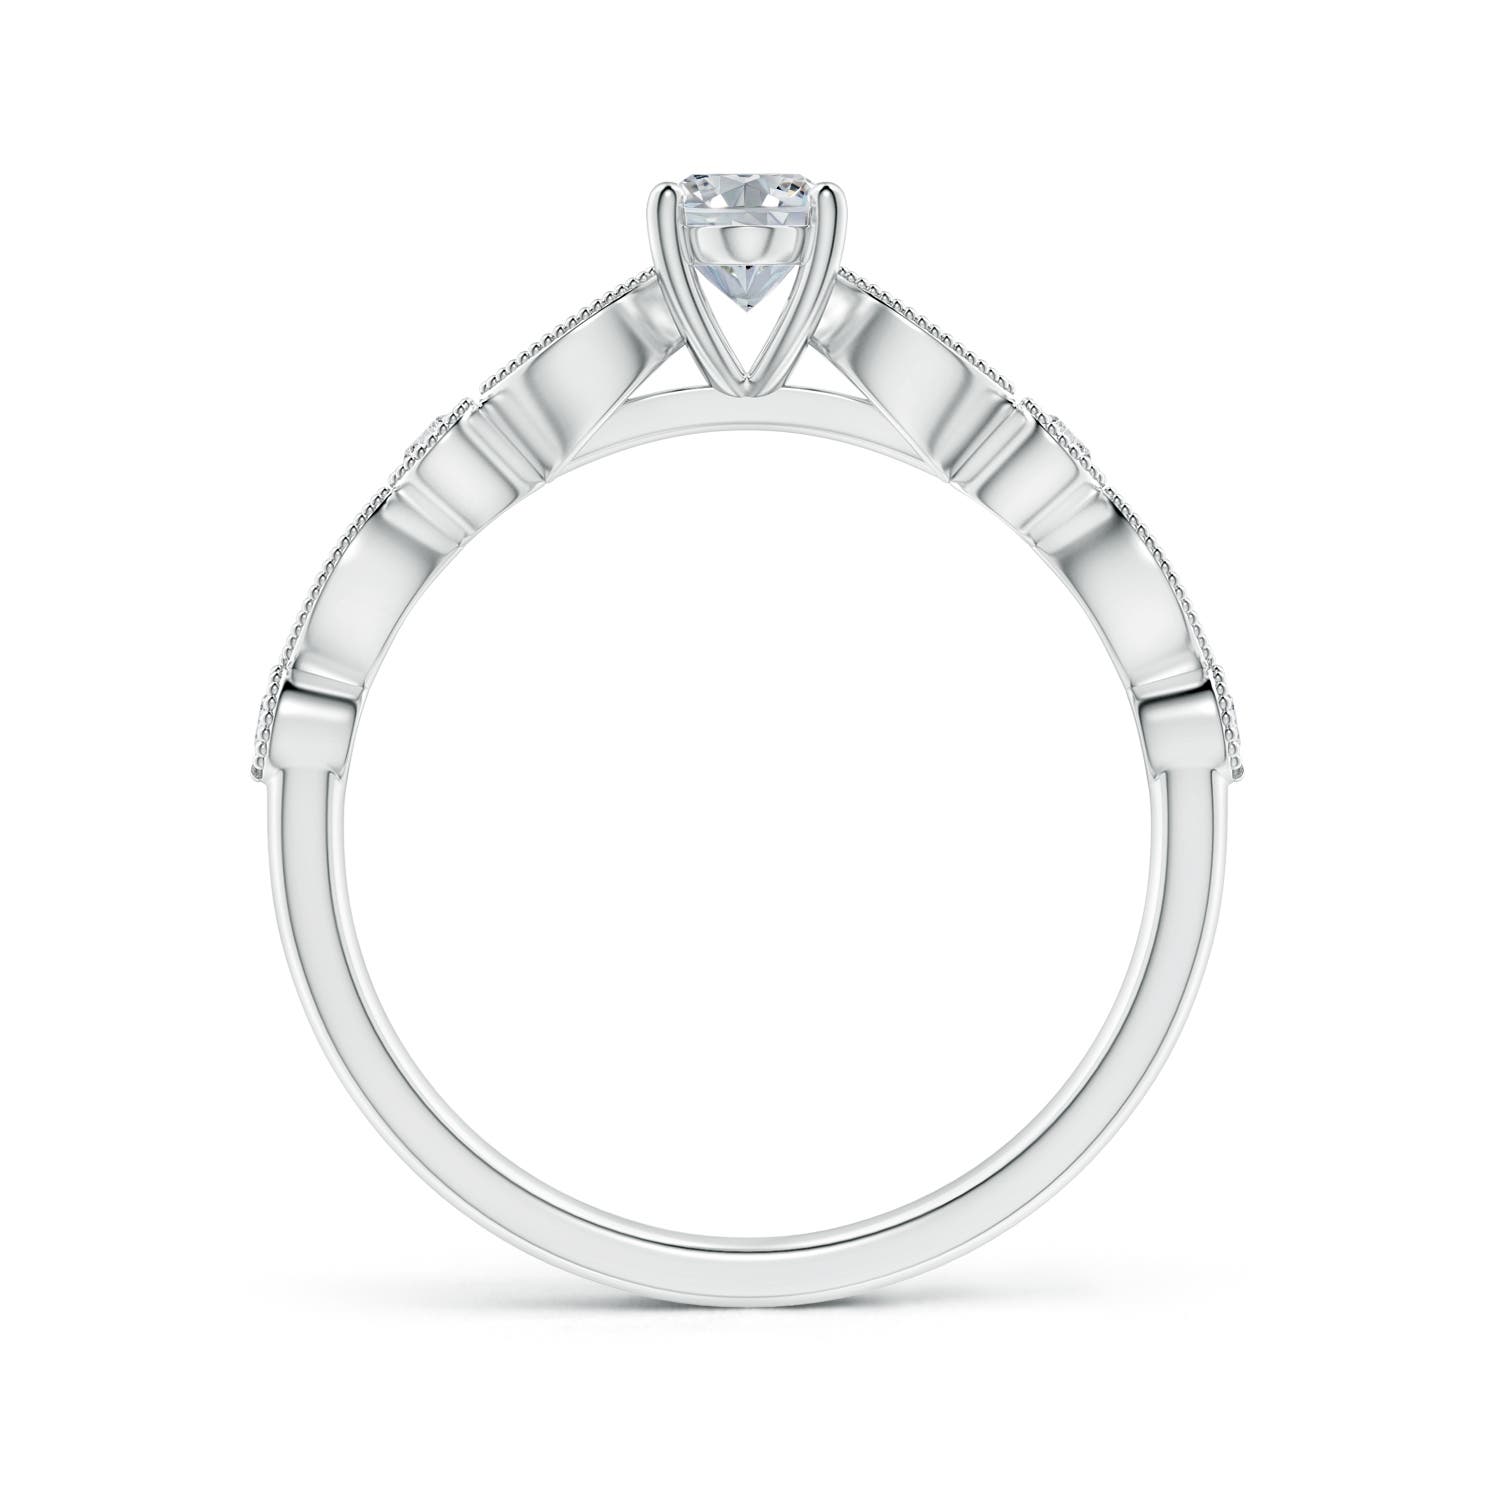 H, SI2 / 0.62 CT / 14 KT White Gold